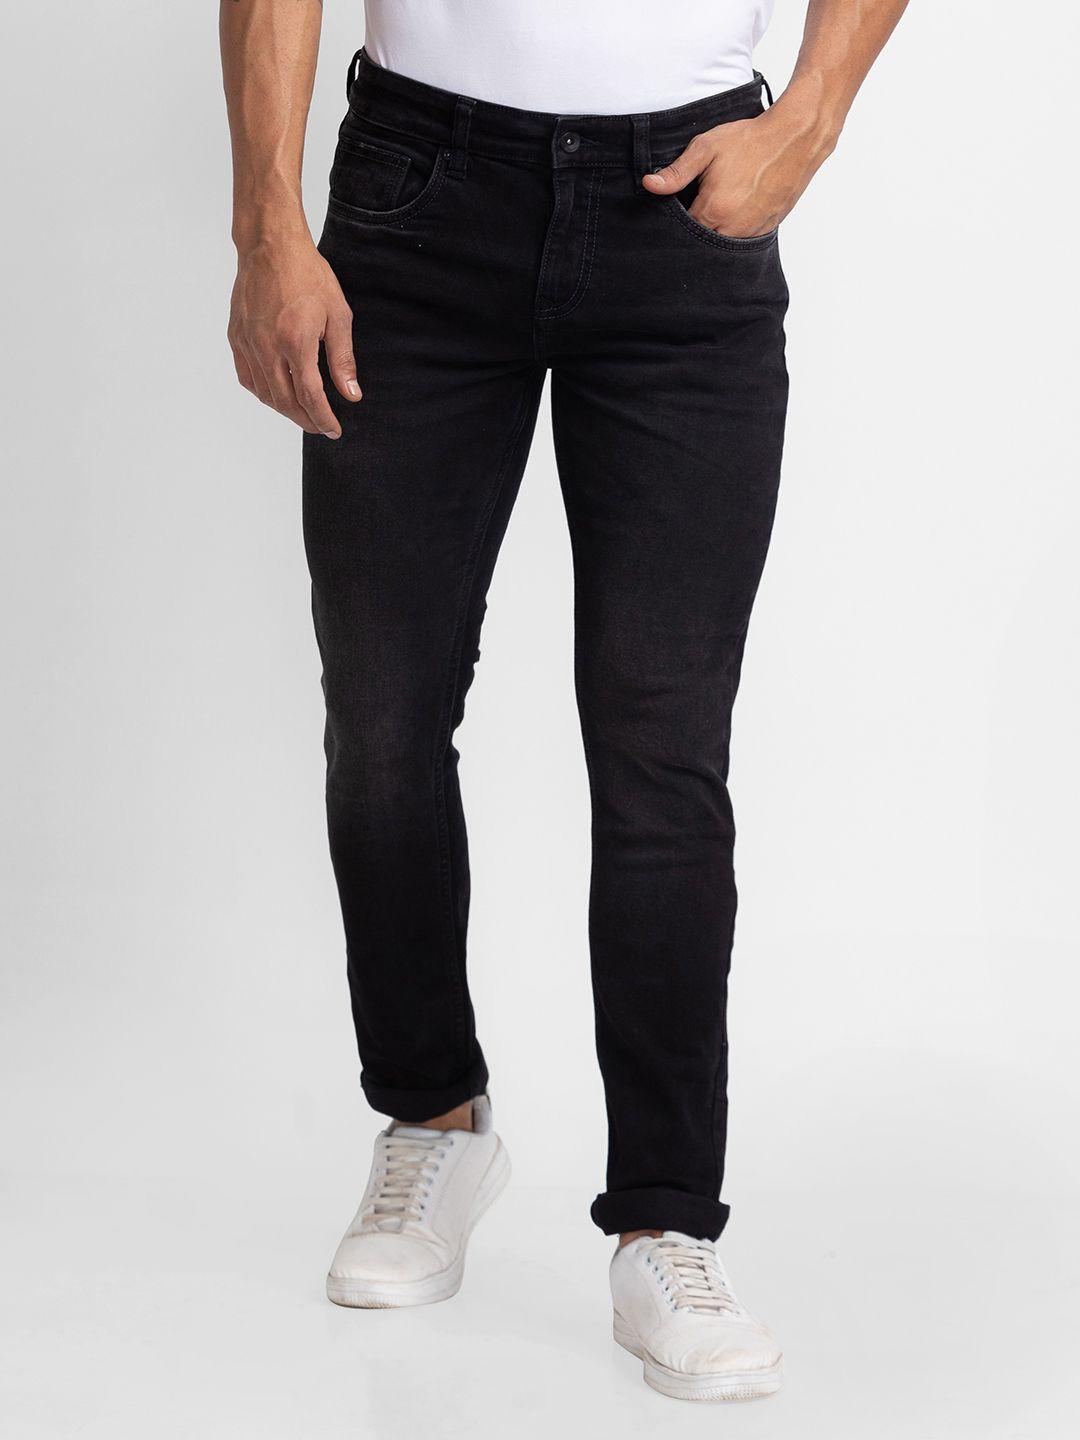 spykar-men-skinny-fit-low-rise-stretchable-jeans